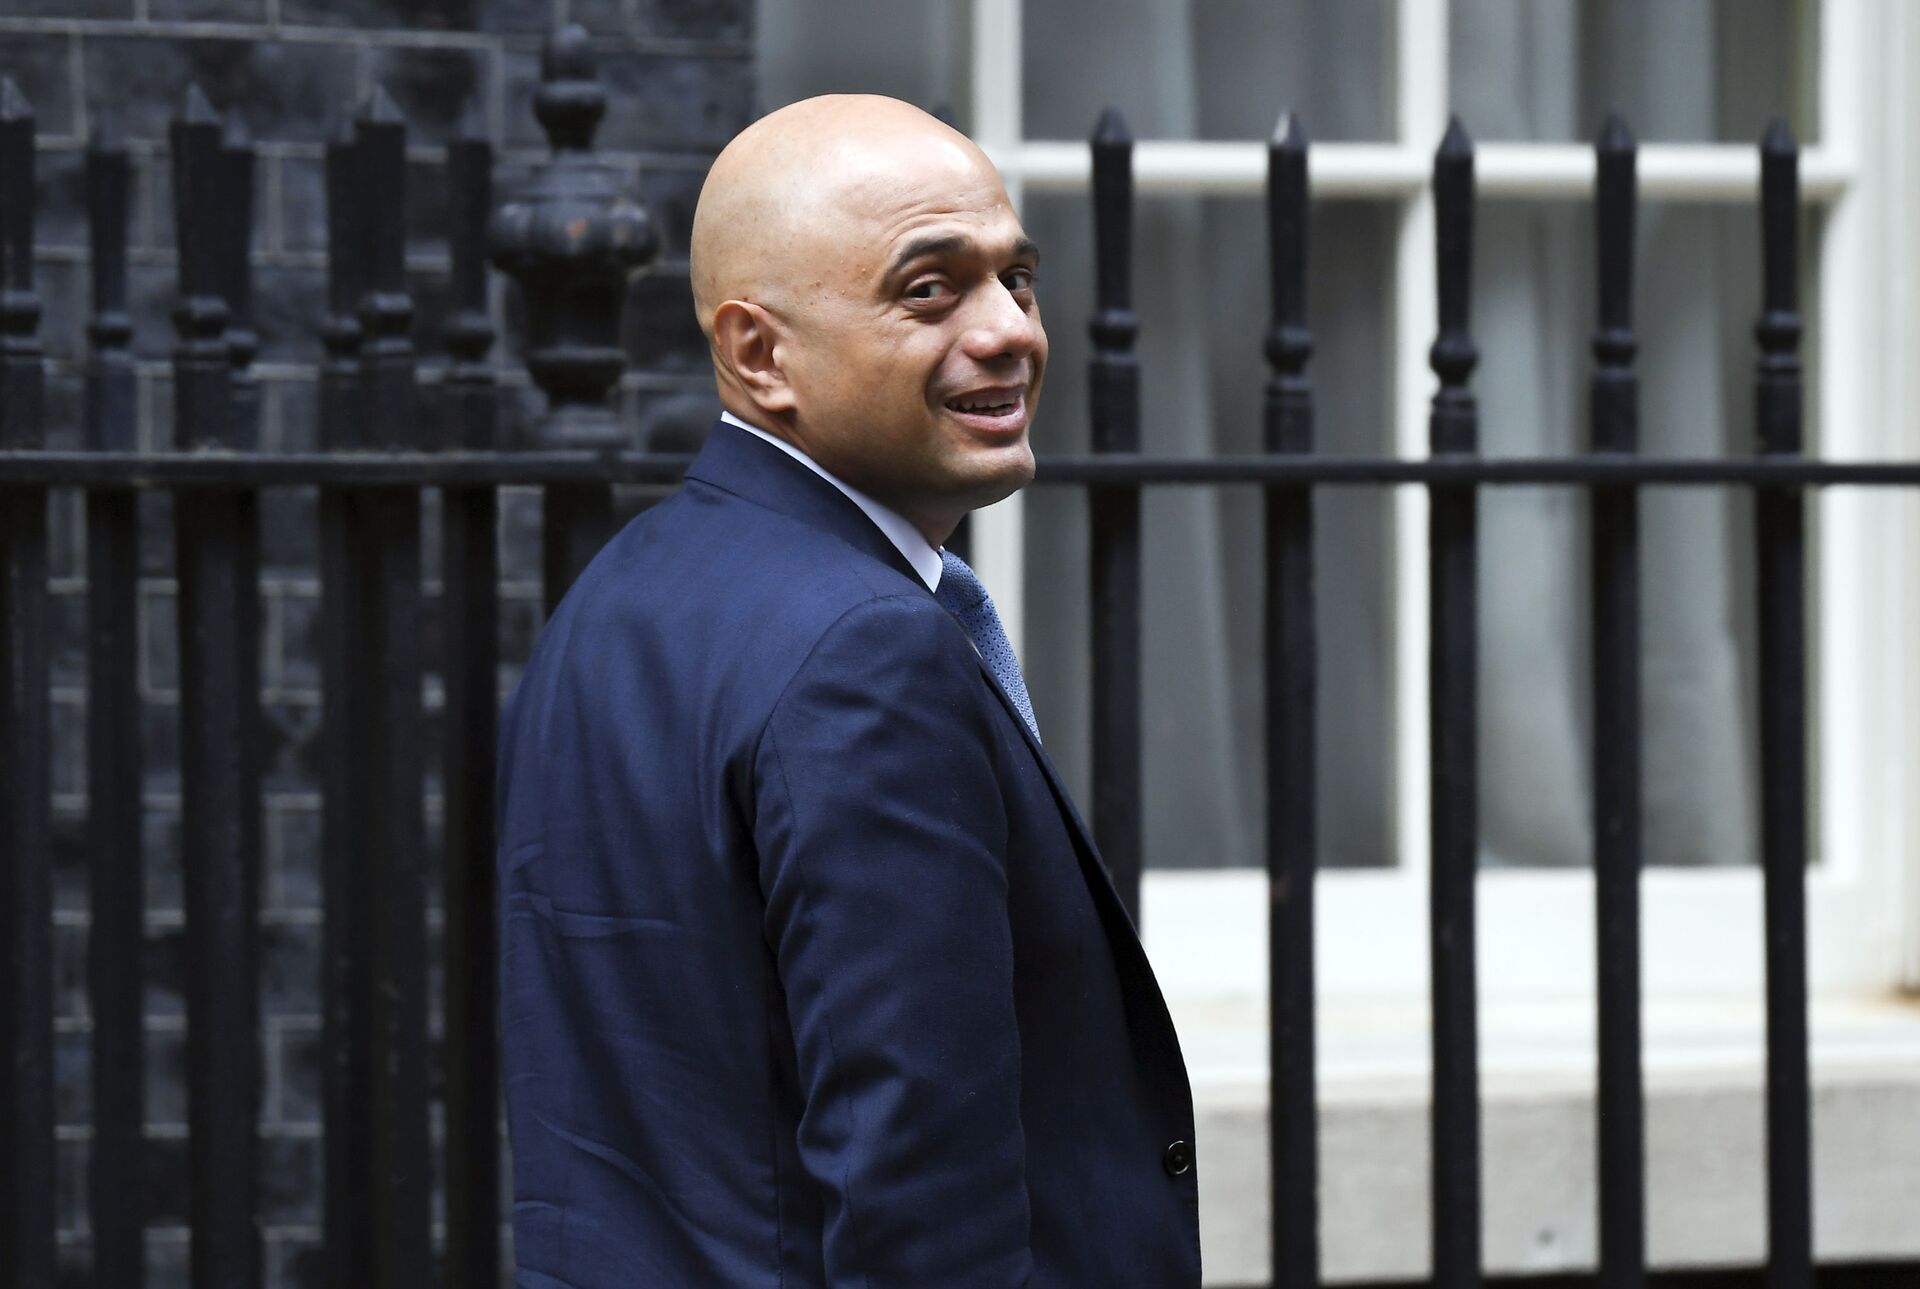 British Chancellor of the Exchequer Sajid Javid leaves11 Downing Street in London, Wednesday, Sept. 4, 2019 - Sputnik International, 1920, 07.09.2021